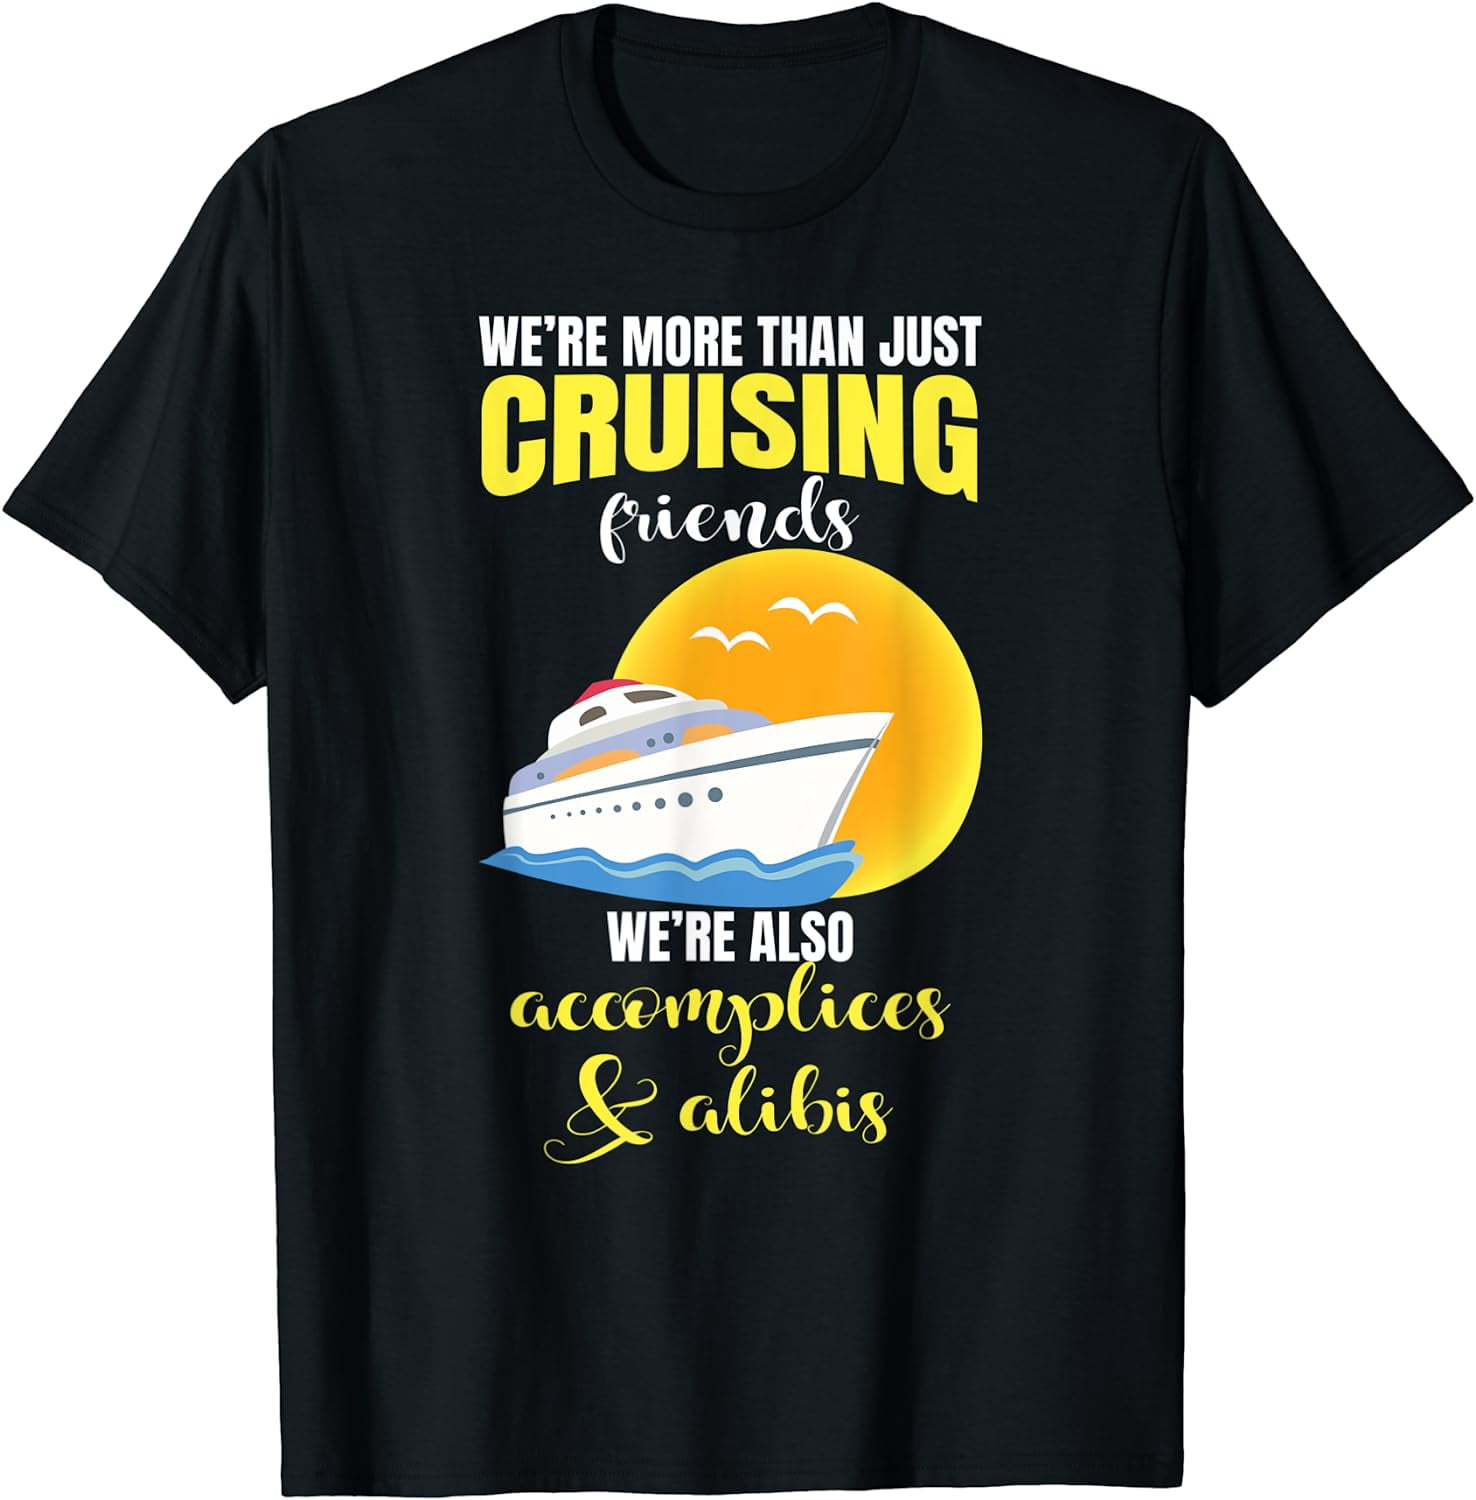 We're Crusing Friends Funny Cruise Ship Lover Graphic T-Shirt - Walmart.com